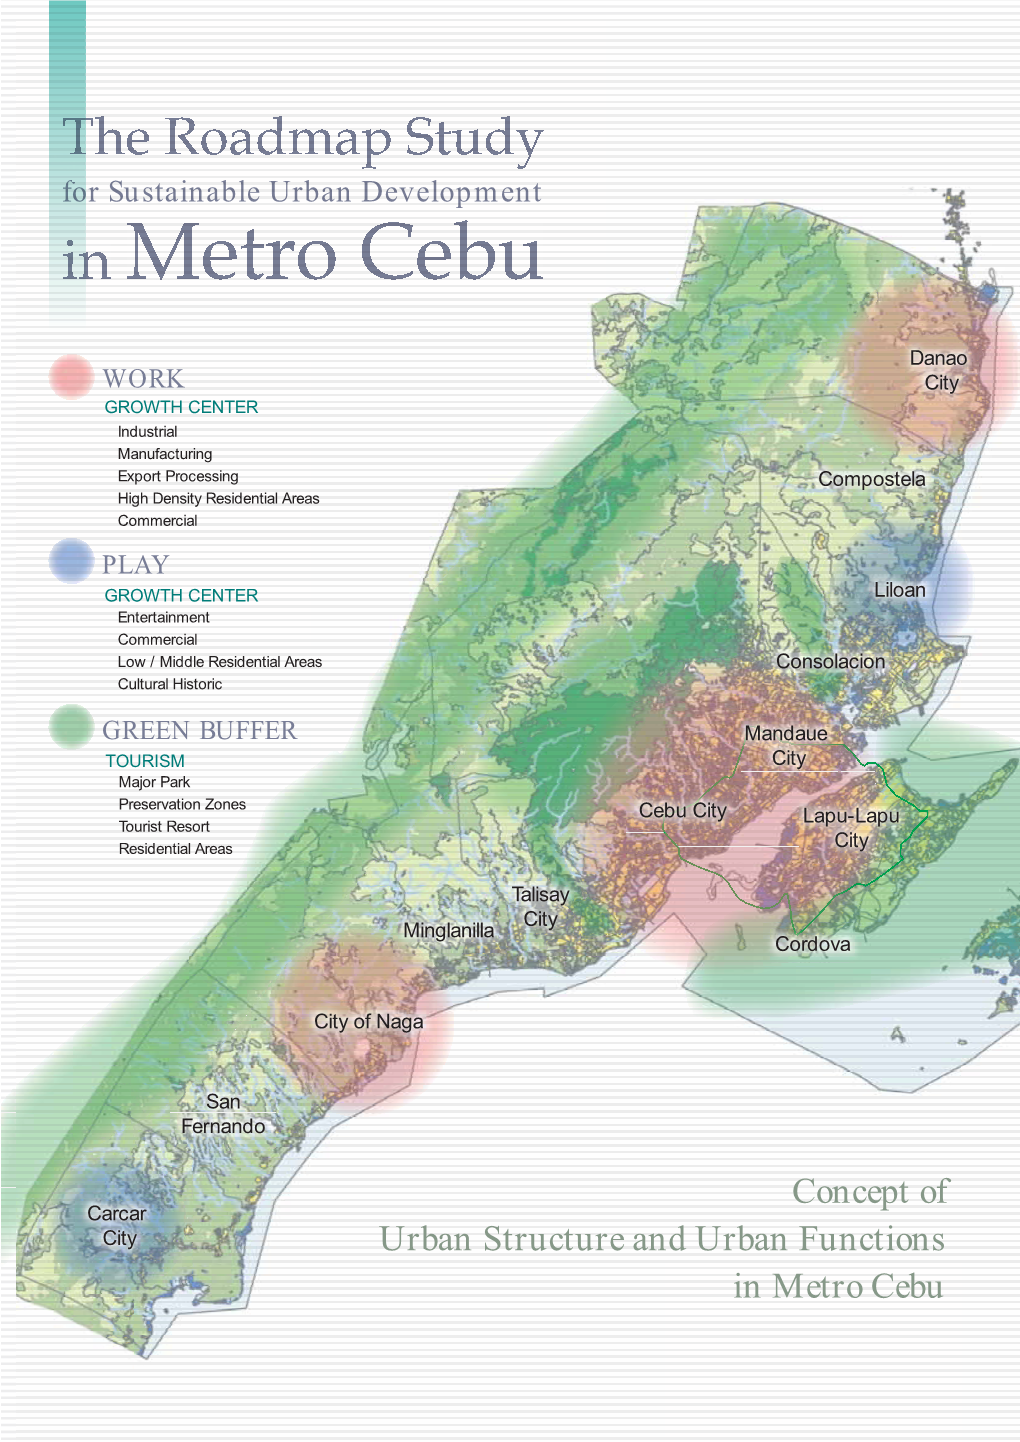 Concept of Urban Structure and Urban Functions in Metro Cebu